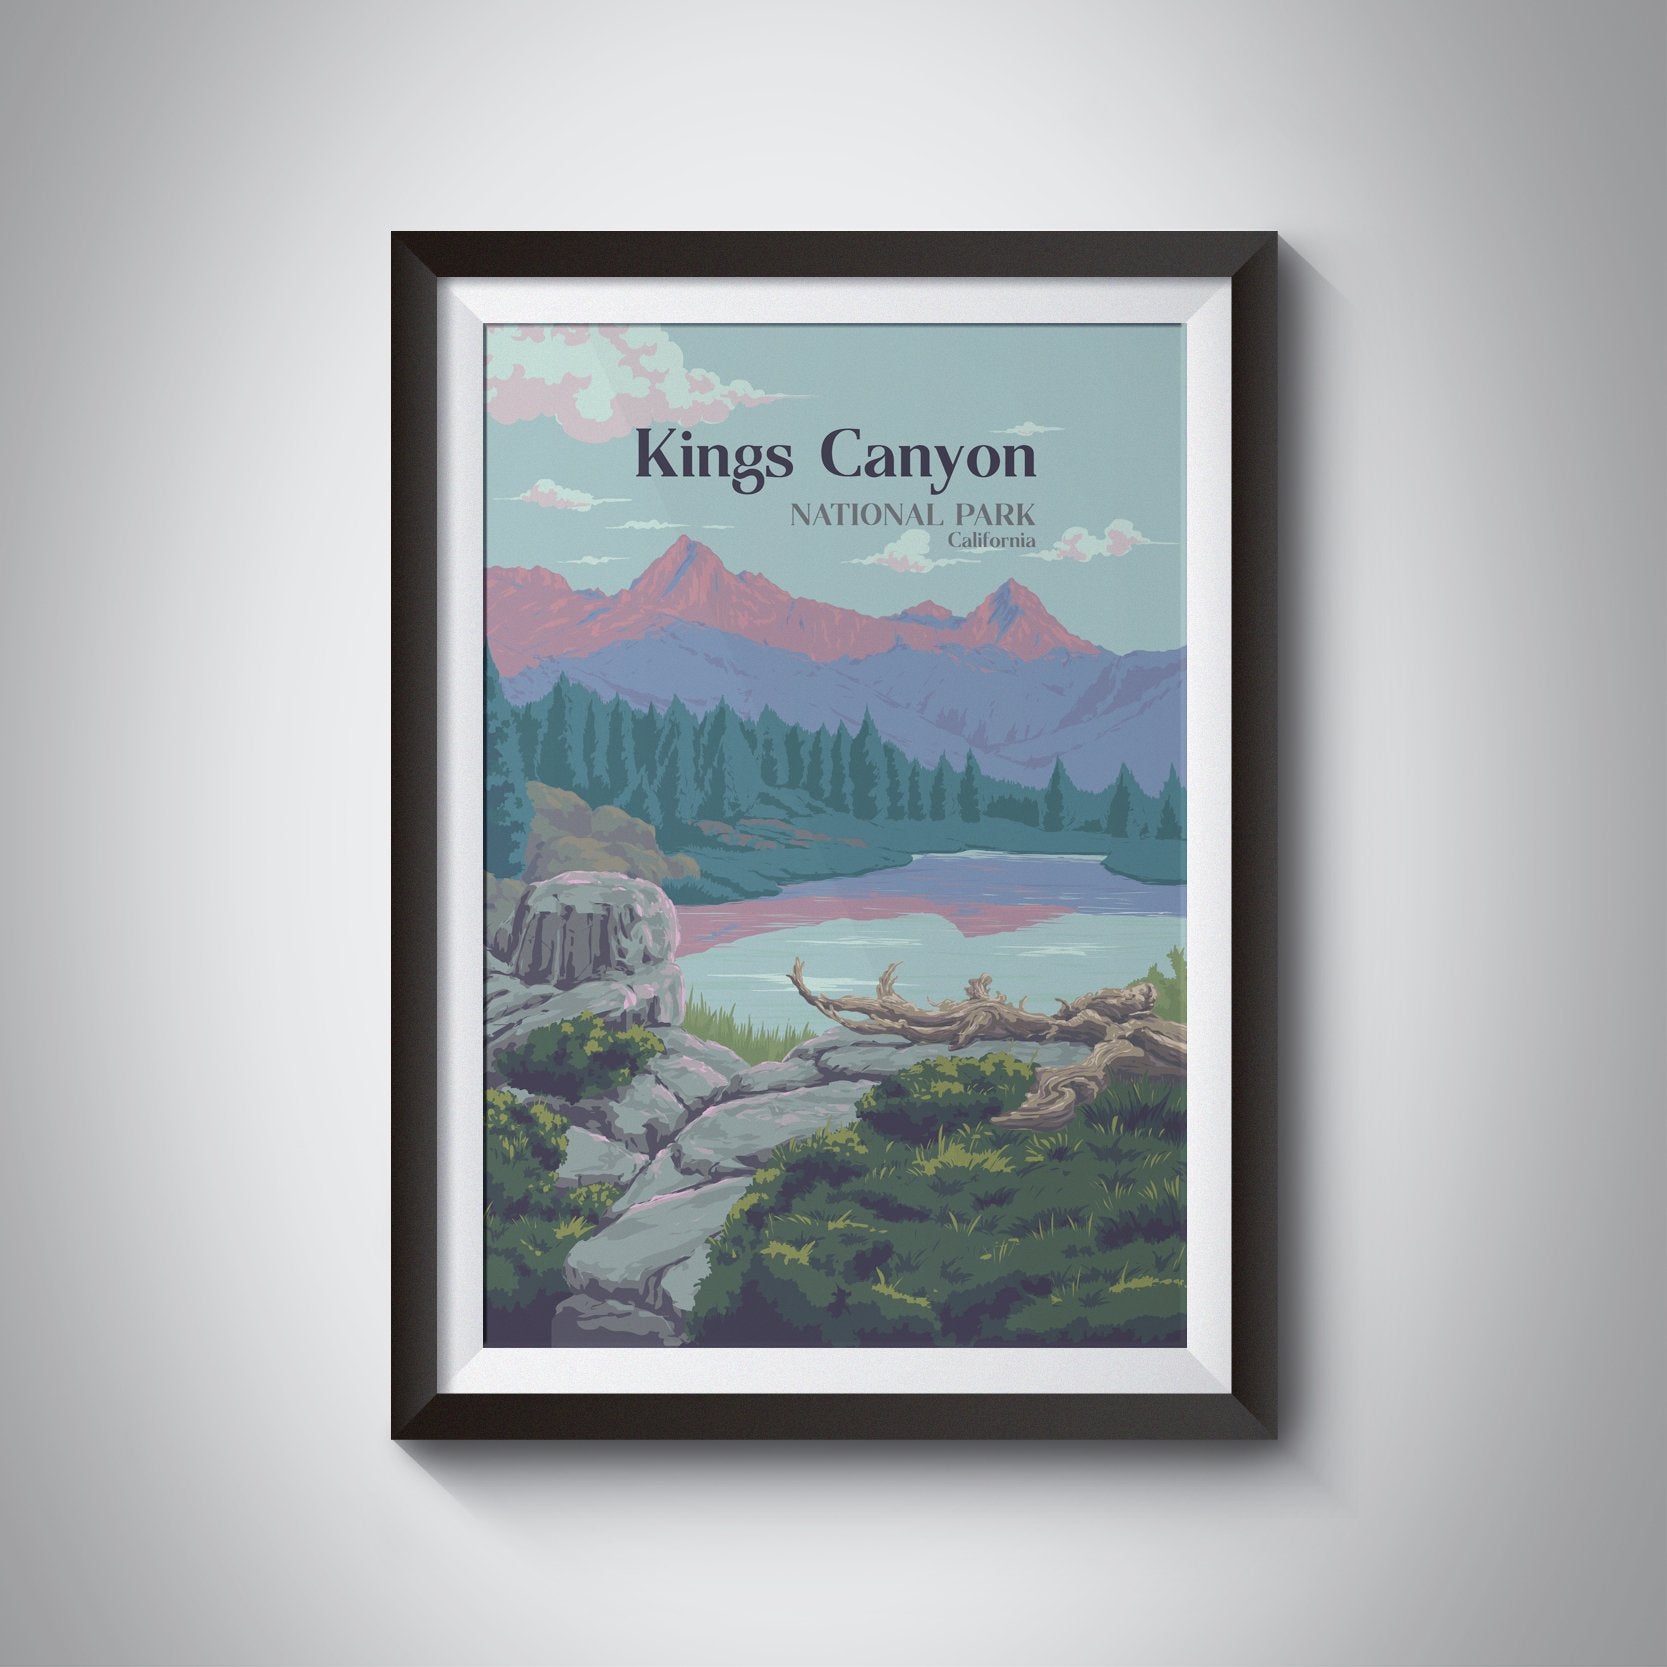 Kings Canyon National Park Travel Poster